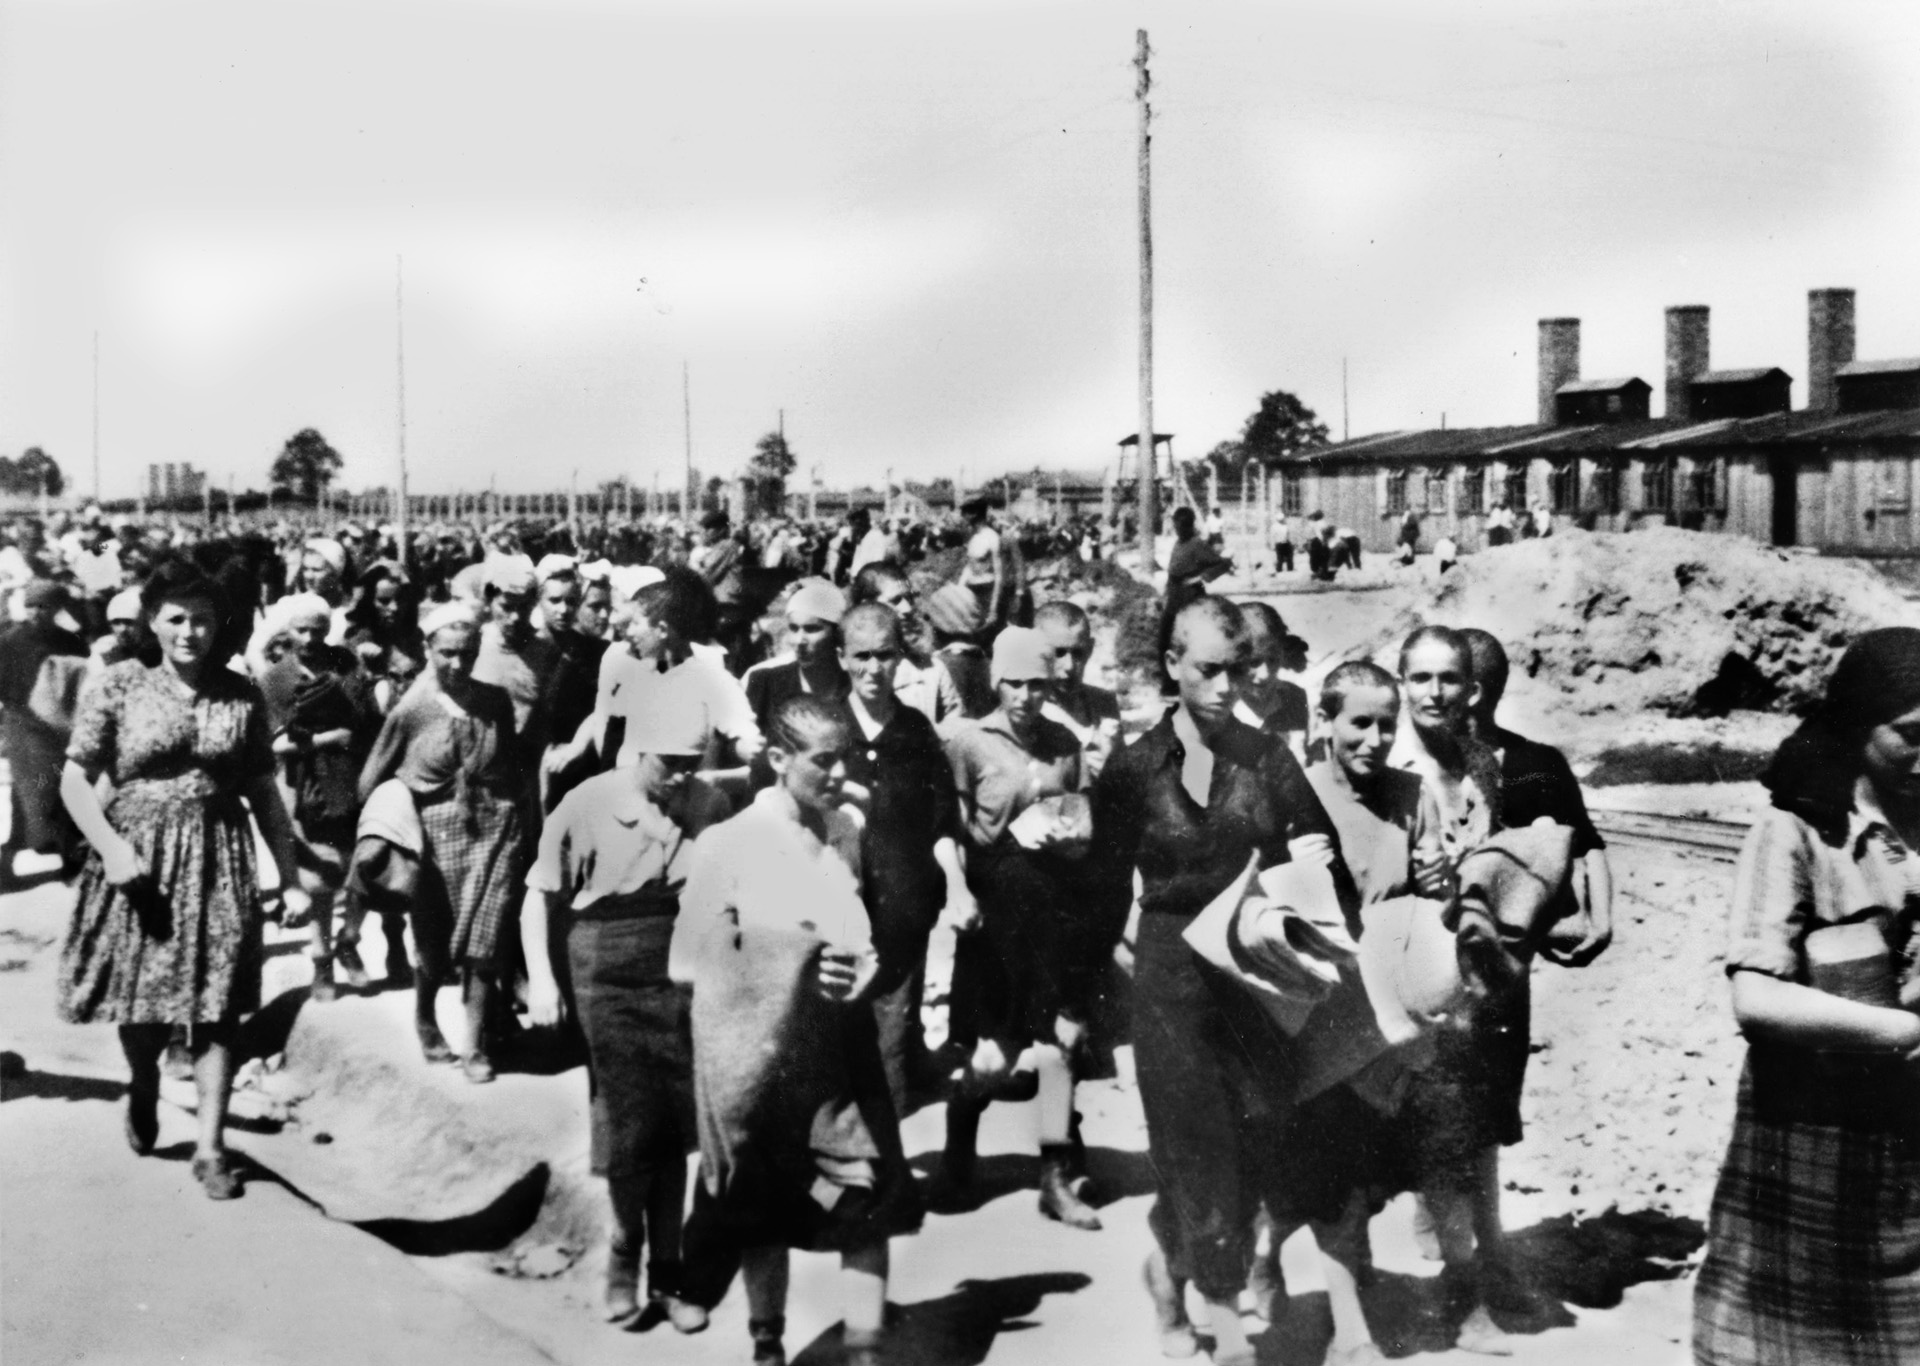 Irma’s victims: Hungarian Jews, most of whose heads have recently been shaved, march through Auschwitz-Birkenau, June 1944. Most would die in the gas chambers.